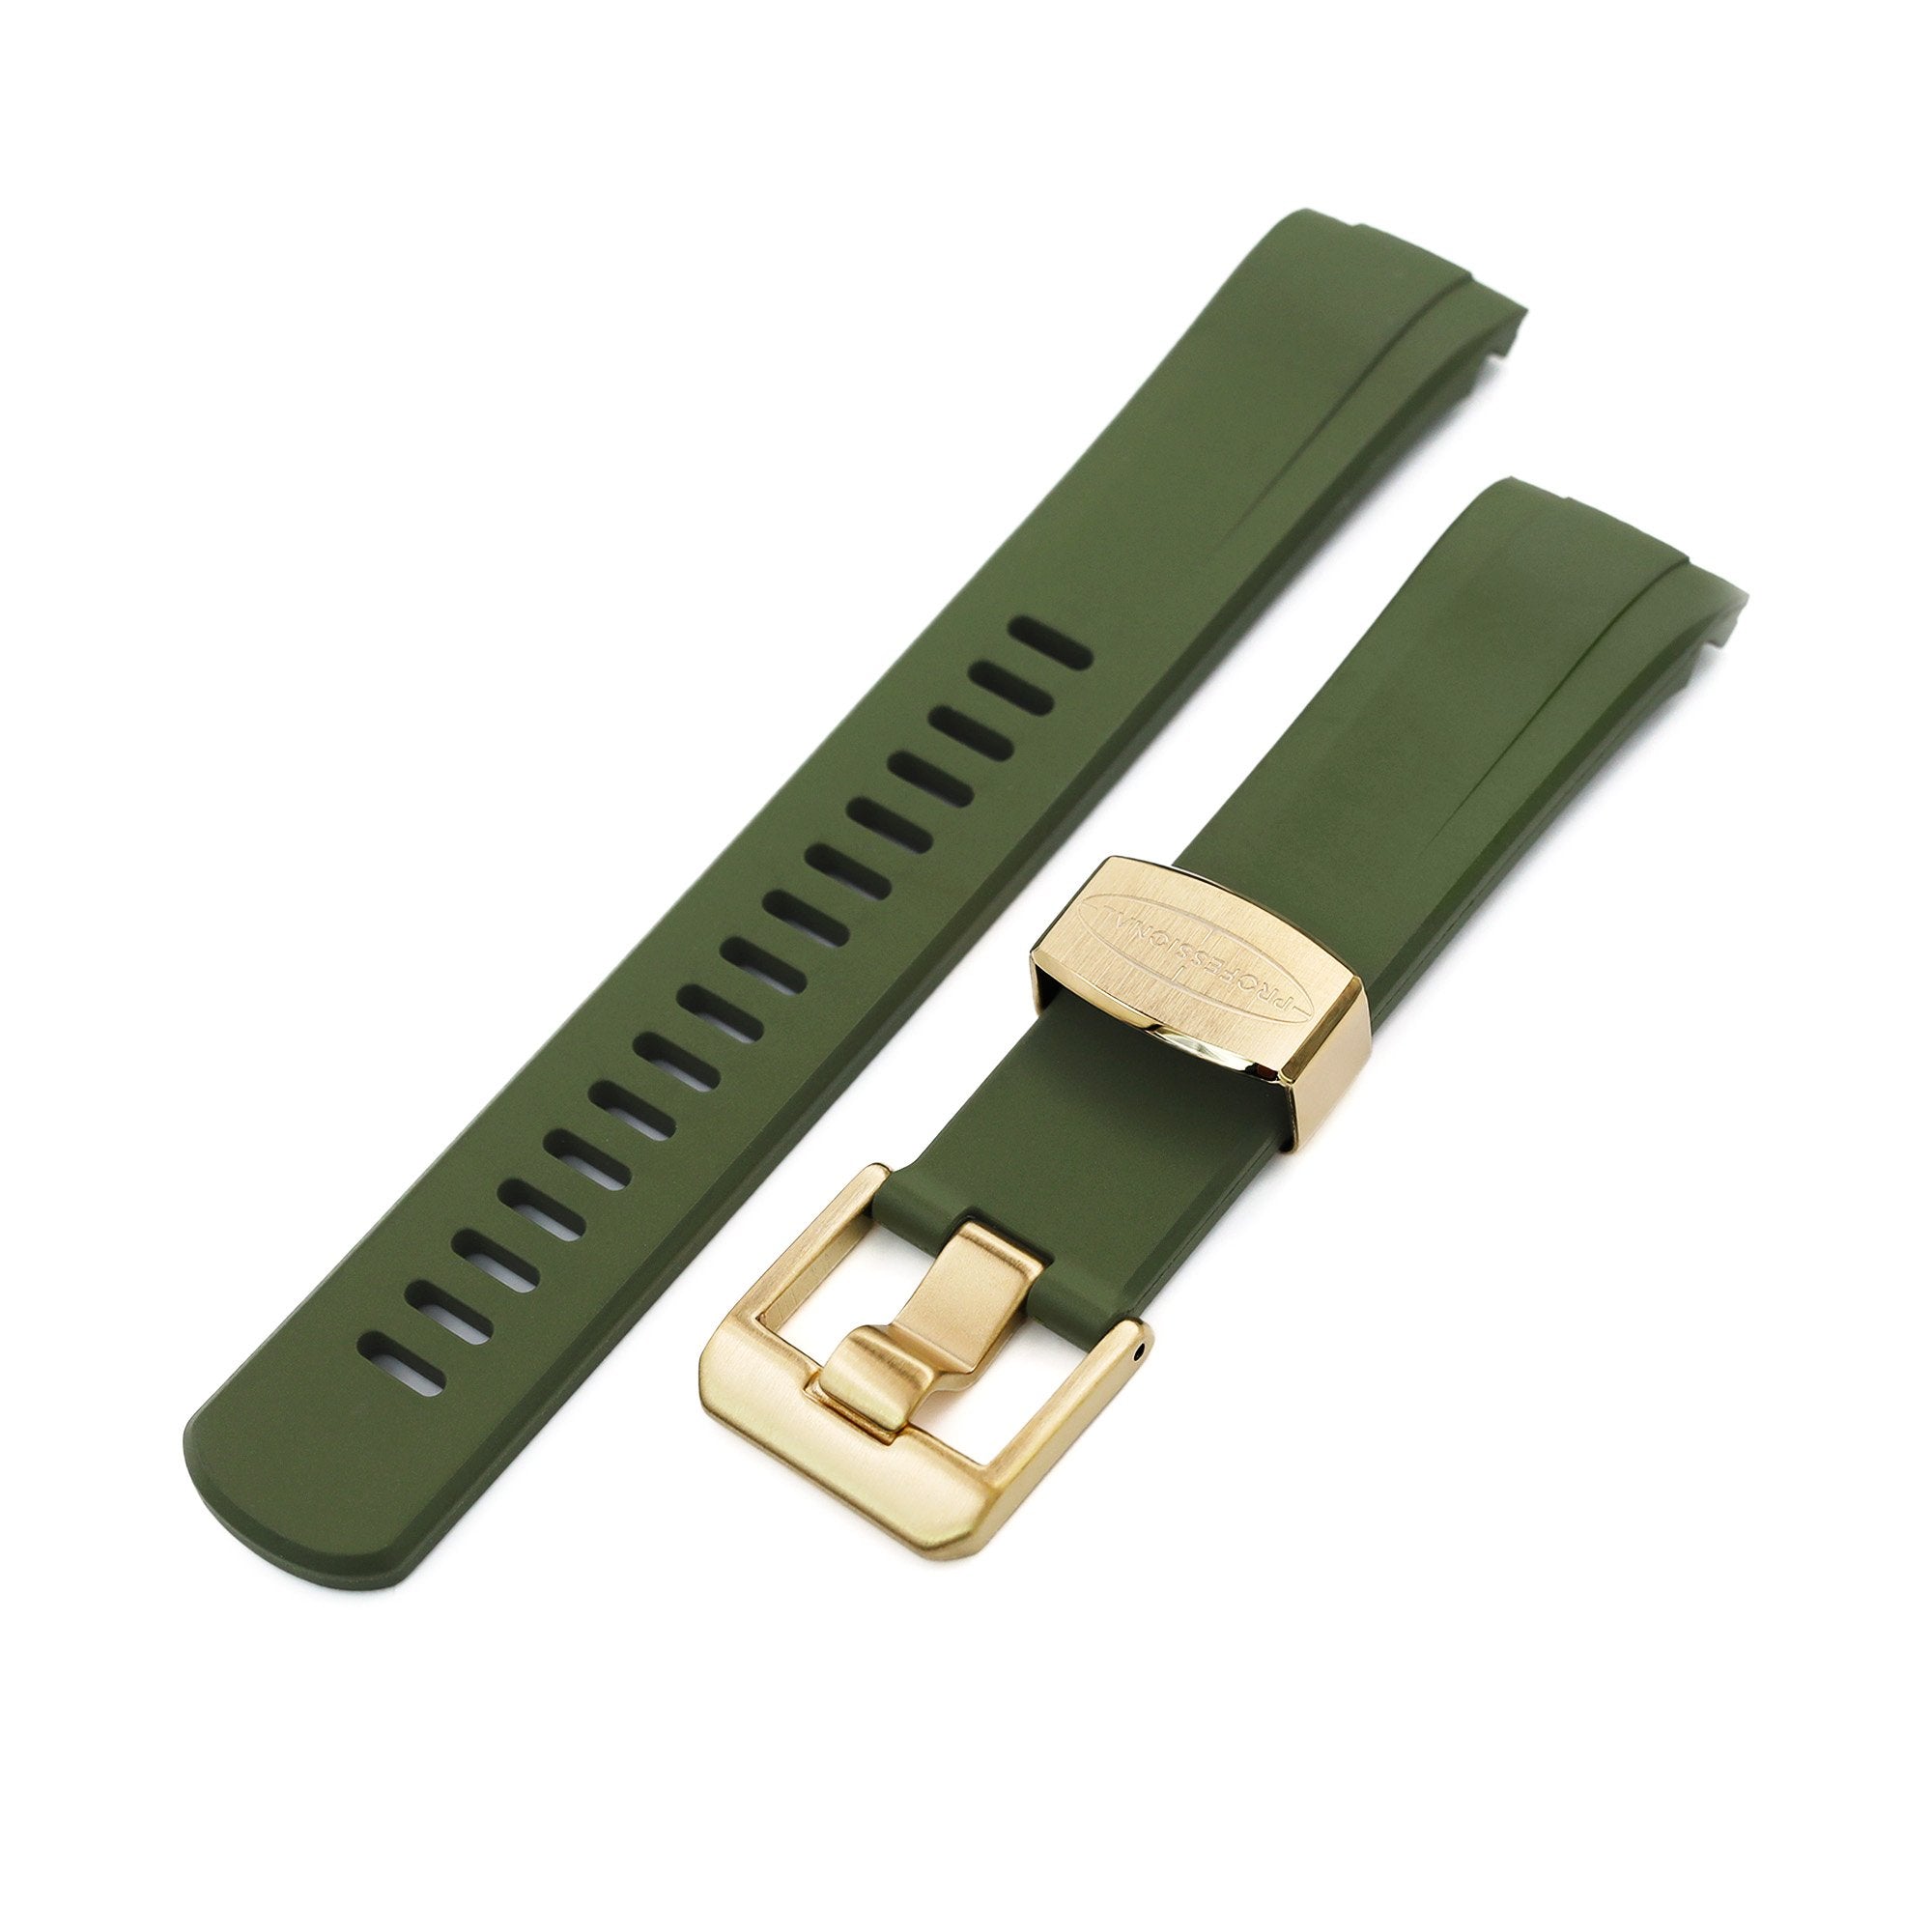 Crafter Blue 22mm Curved Lug End Military Green Rubber Dive Watch Strap for Seiko Gold Turtle SRPC44 IP Gold Buckle Strapcode Watch Bands